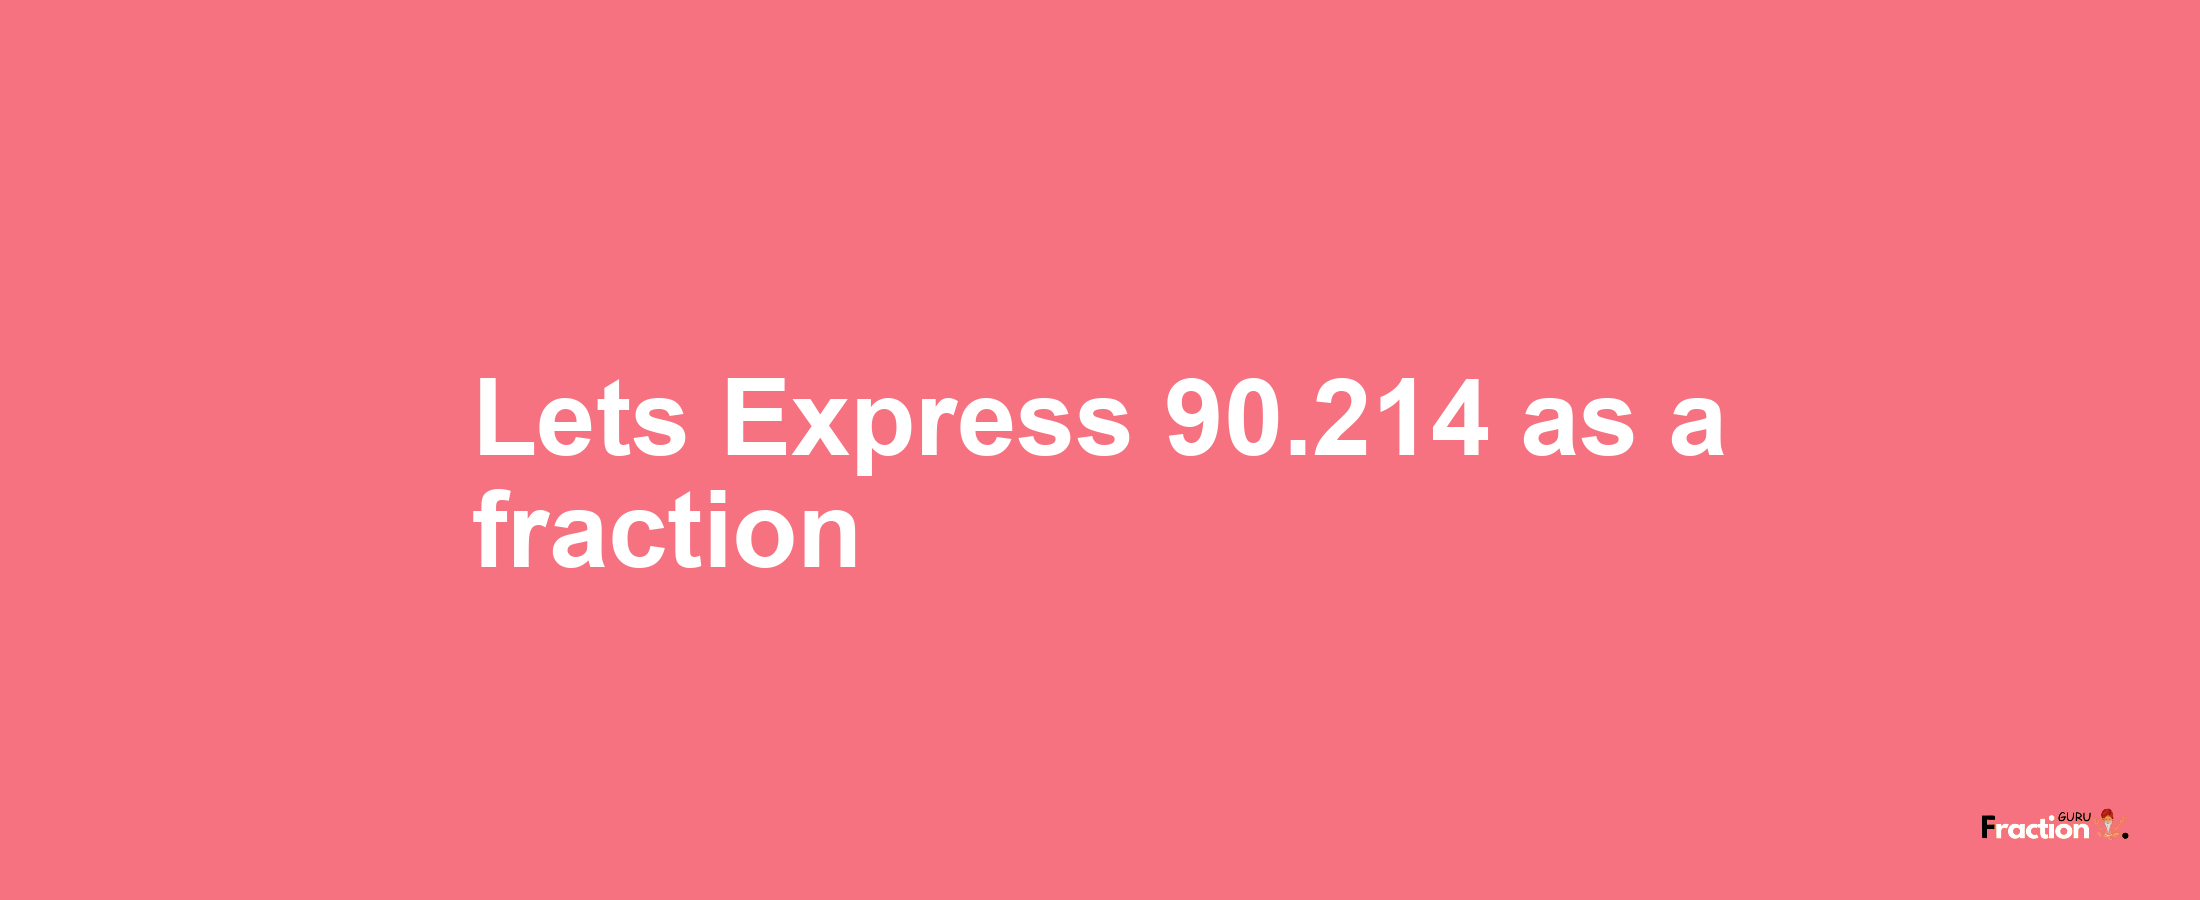 Lets Express 90.214 as afraction